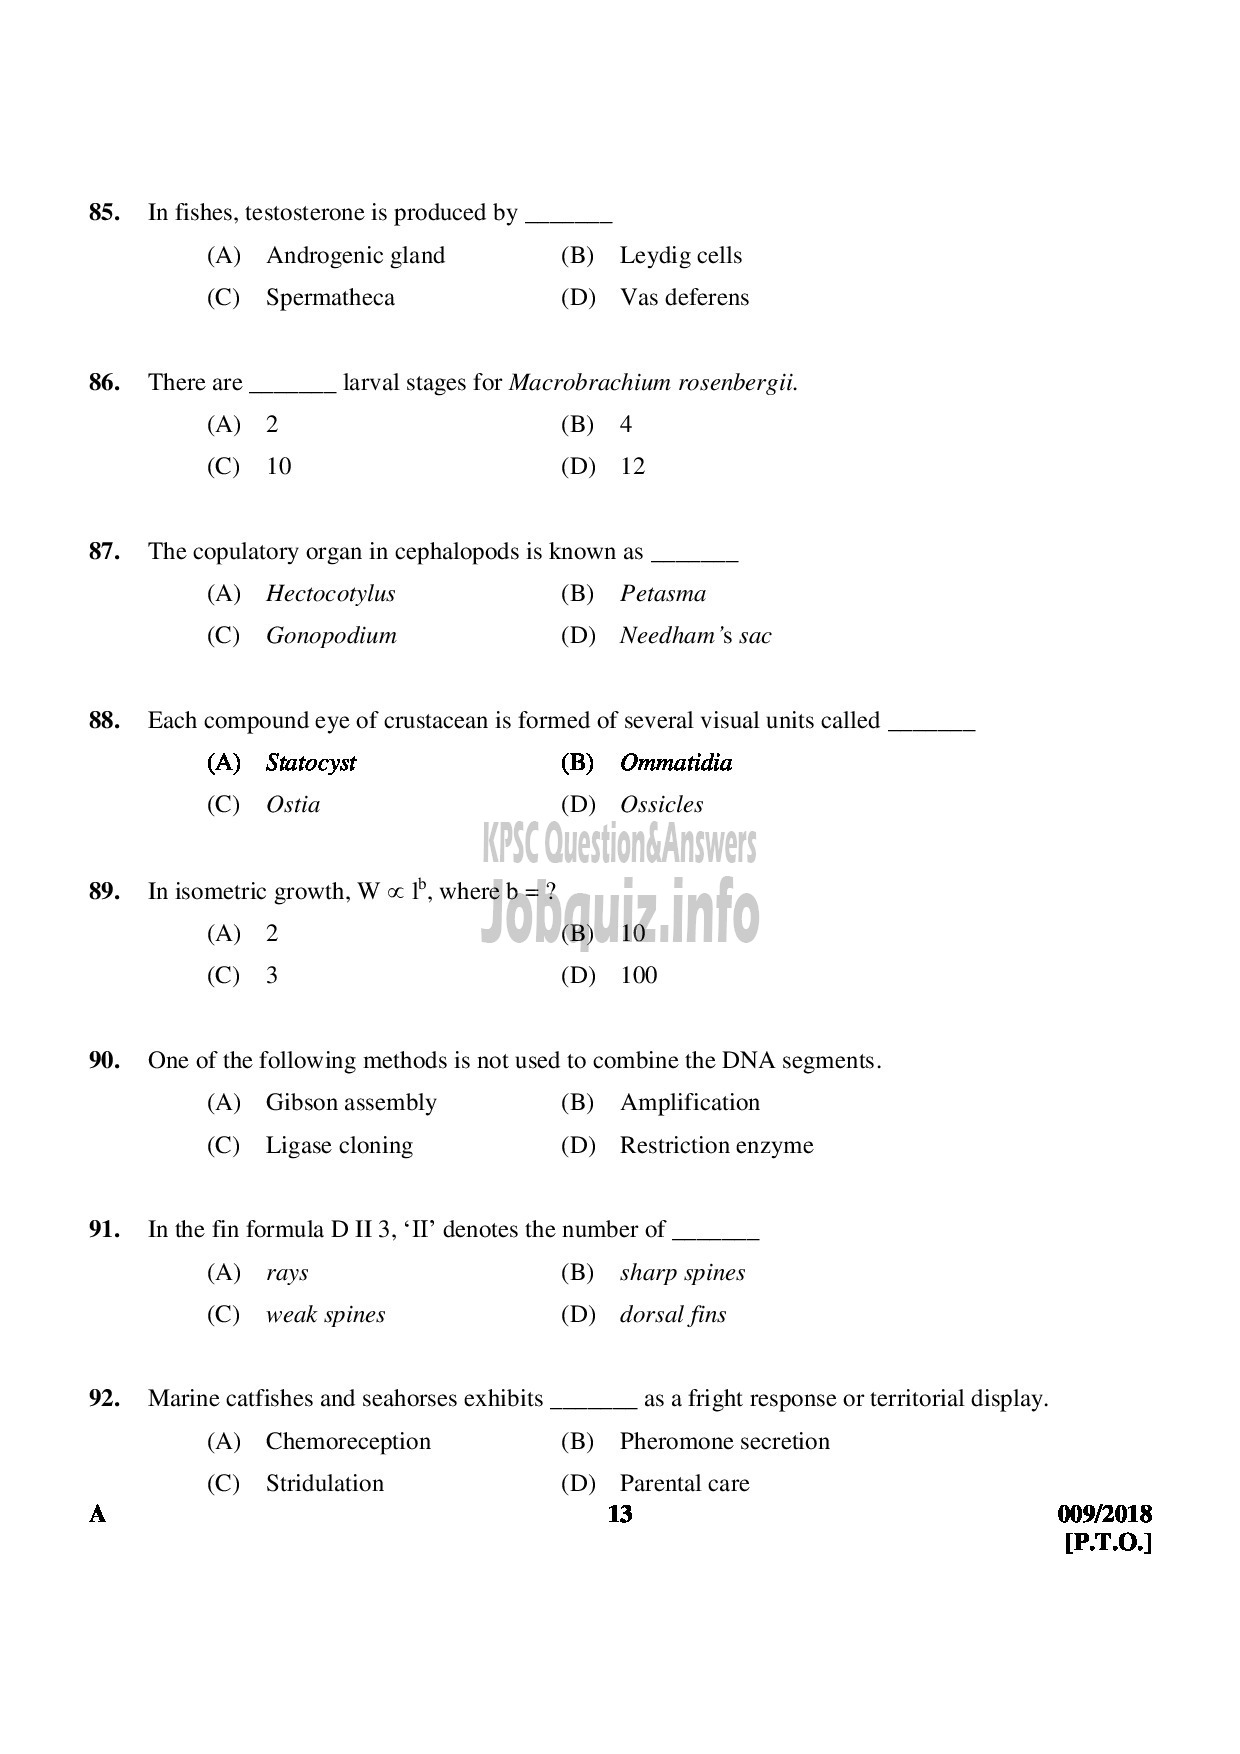 Kerala PSC Question Paper - VOCATIONAL INSTRUCTOR IN FISHERIES VOCATIONAL HIGHER SECONDARY EDUCATION-13